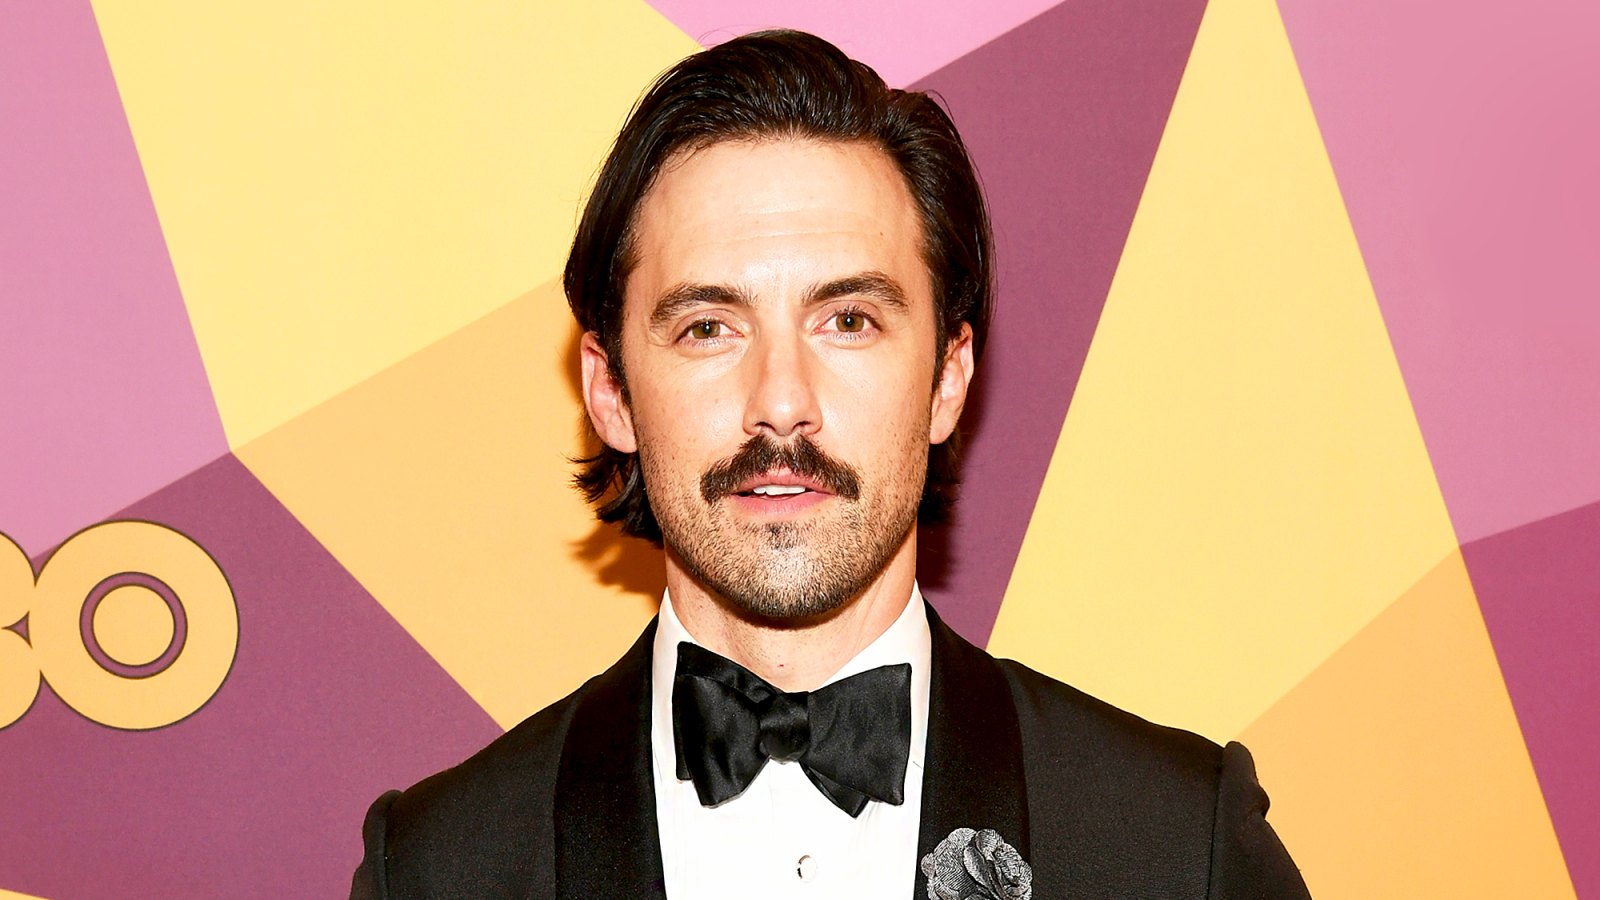 Milo Ventimiglia attends HBO's Official Golden Globe Awards After Party at Circa 55 Restaurant on January 7, 2018 in Los Angeles, California.